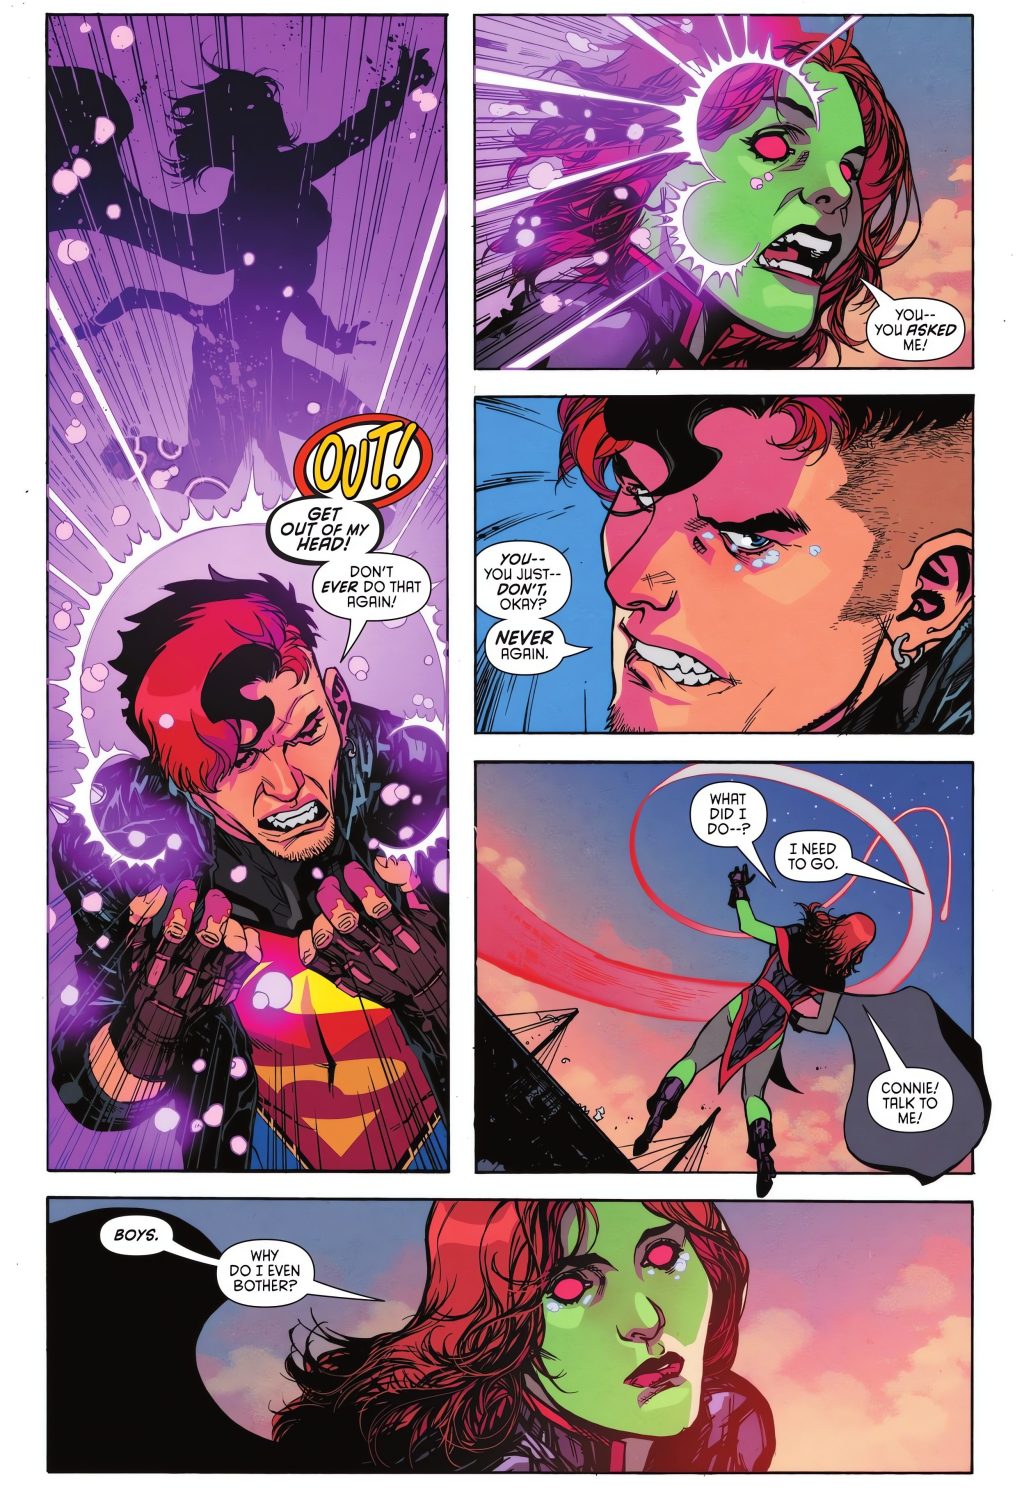 Conner Kent pushes Miss Martian out of his mind in Action Comics Vol. 1 #1057 "Super is as Super does" (2023), DC. Words by Magdalene Visaggio, art by Matthew Clark, Matt Herms, and Rob Leigh.